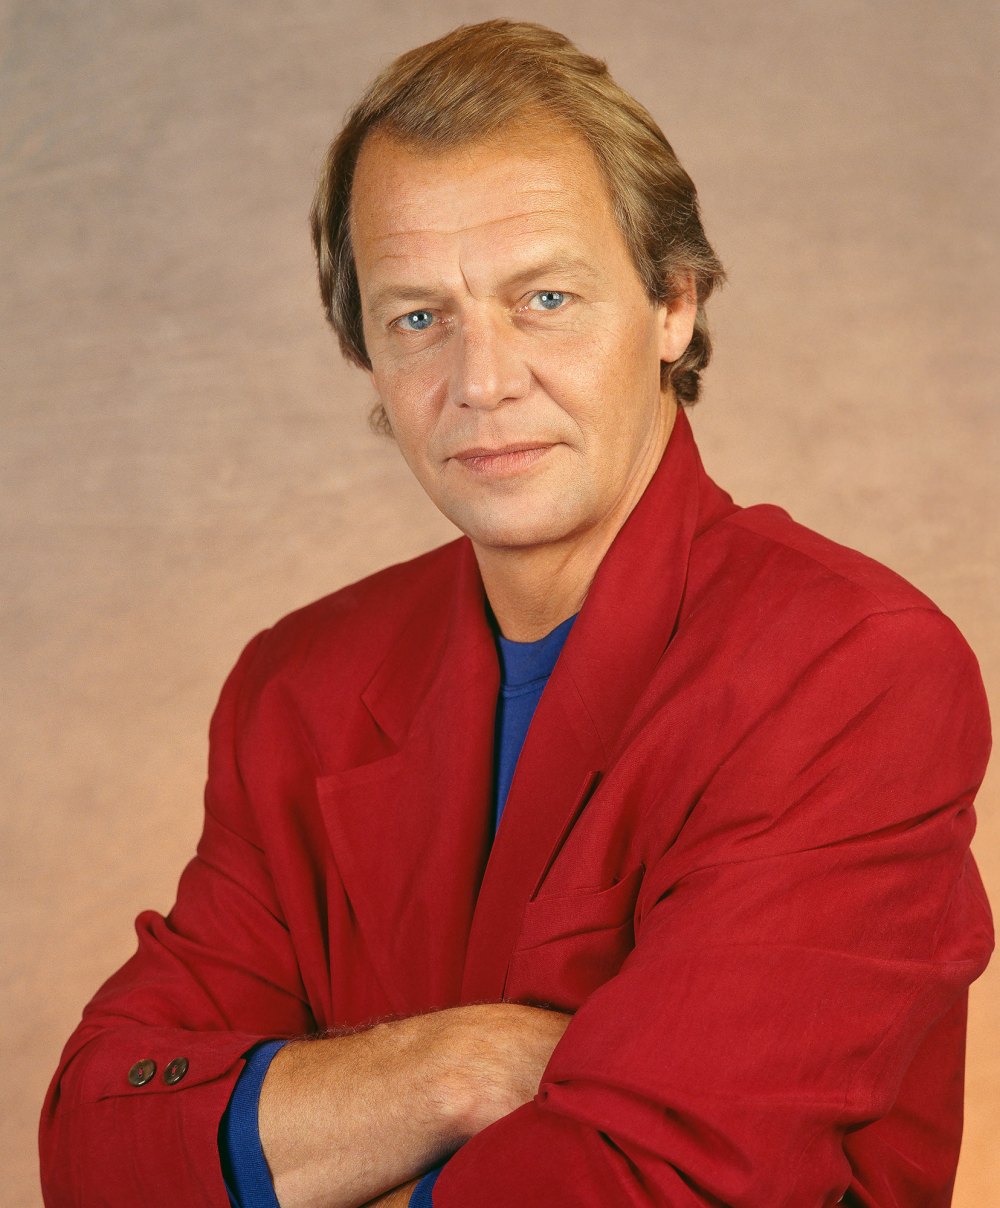 Actor David Soul, one half of 'Starsky and Hutch,' dies at 80